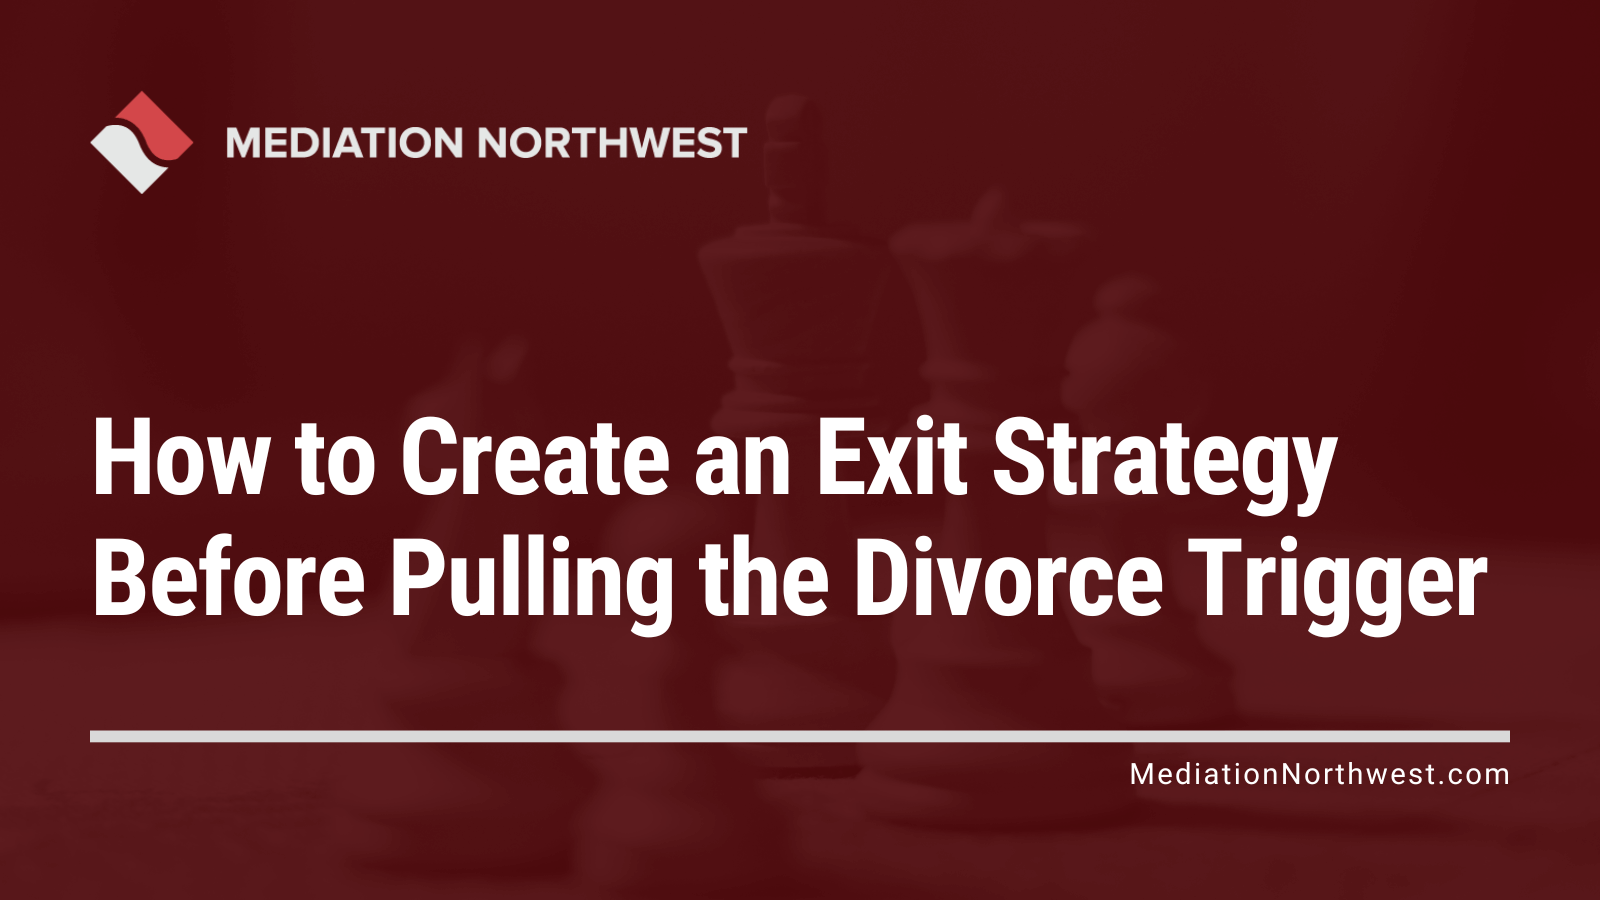 How to Create an Exit Strategy Before Pulling the Divorce Trigger - oregon divorce mediation northwest - julie armbrust